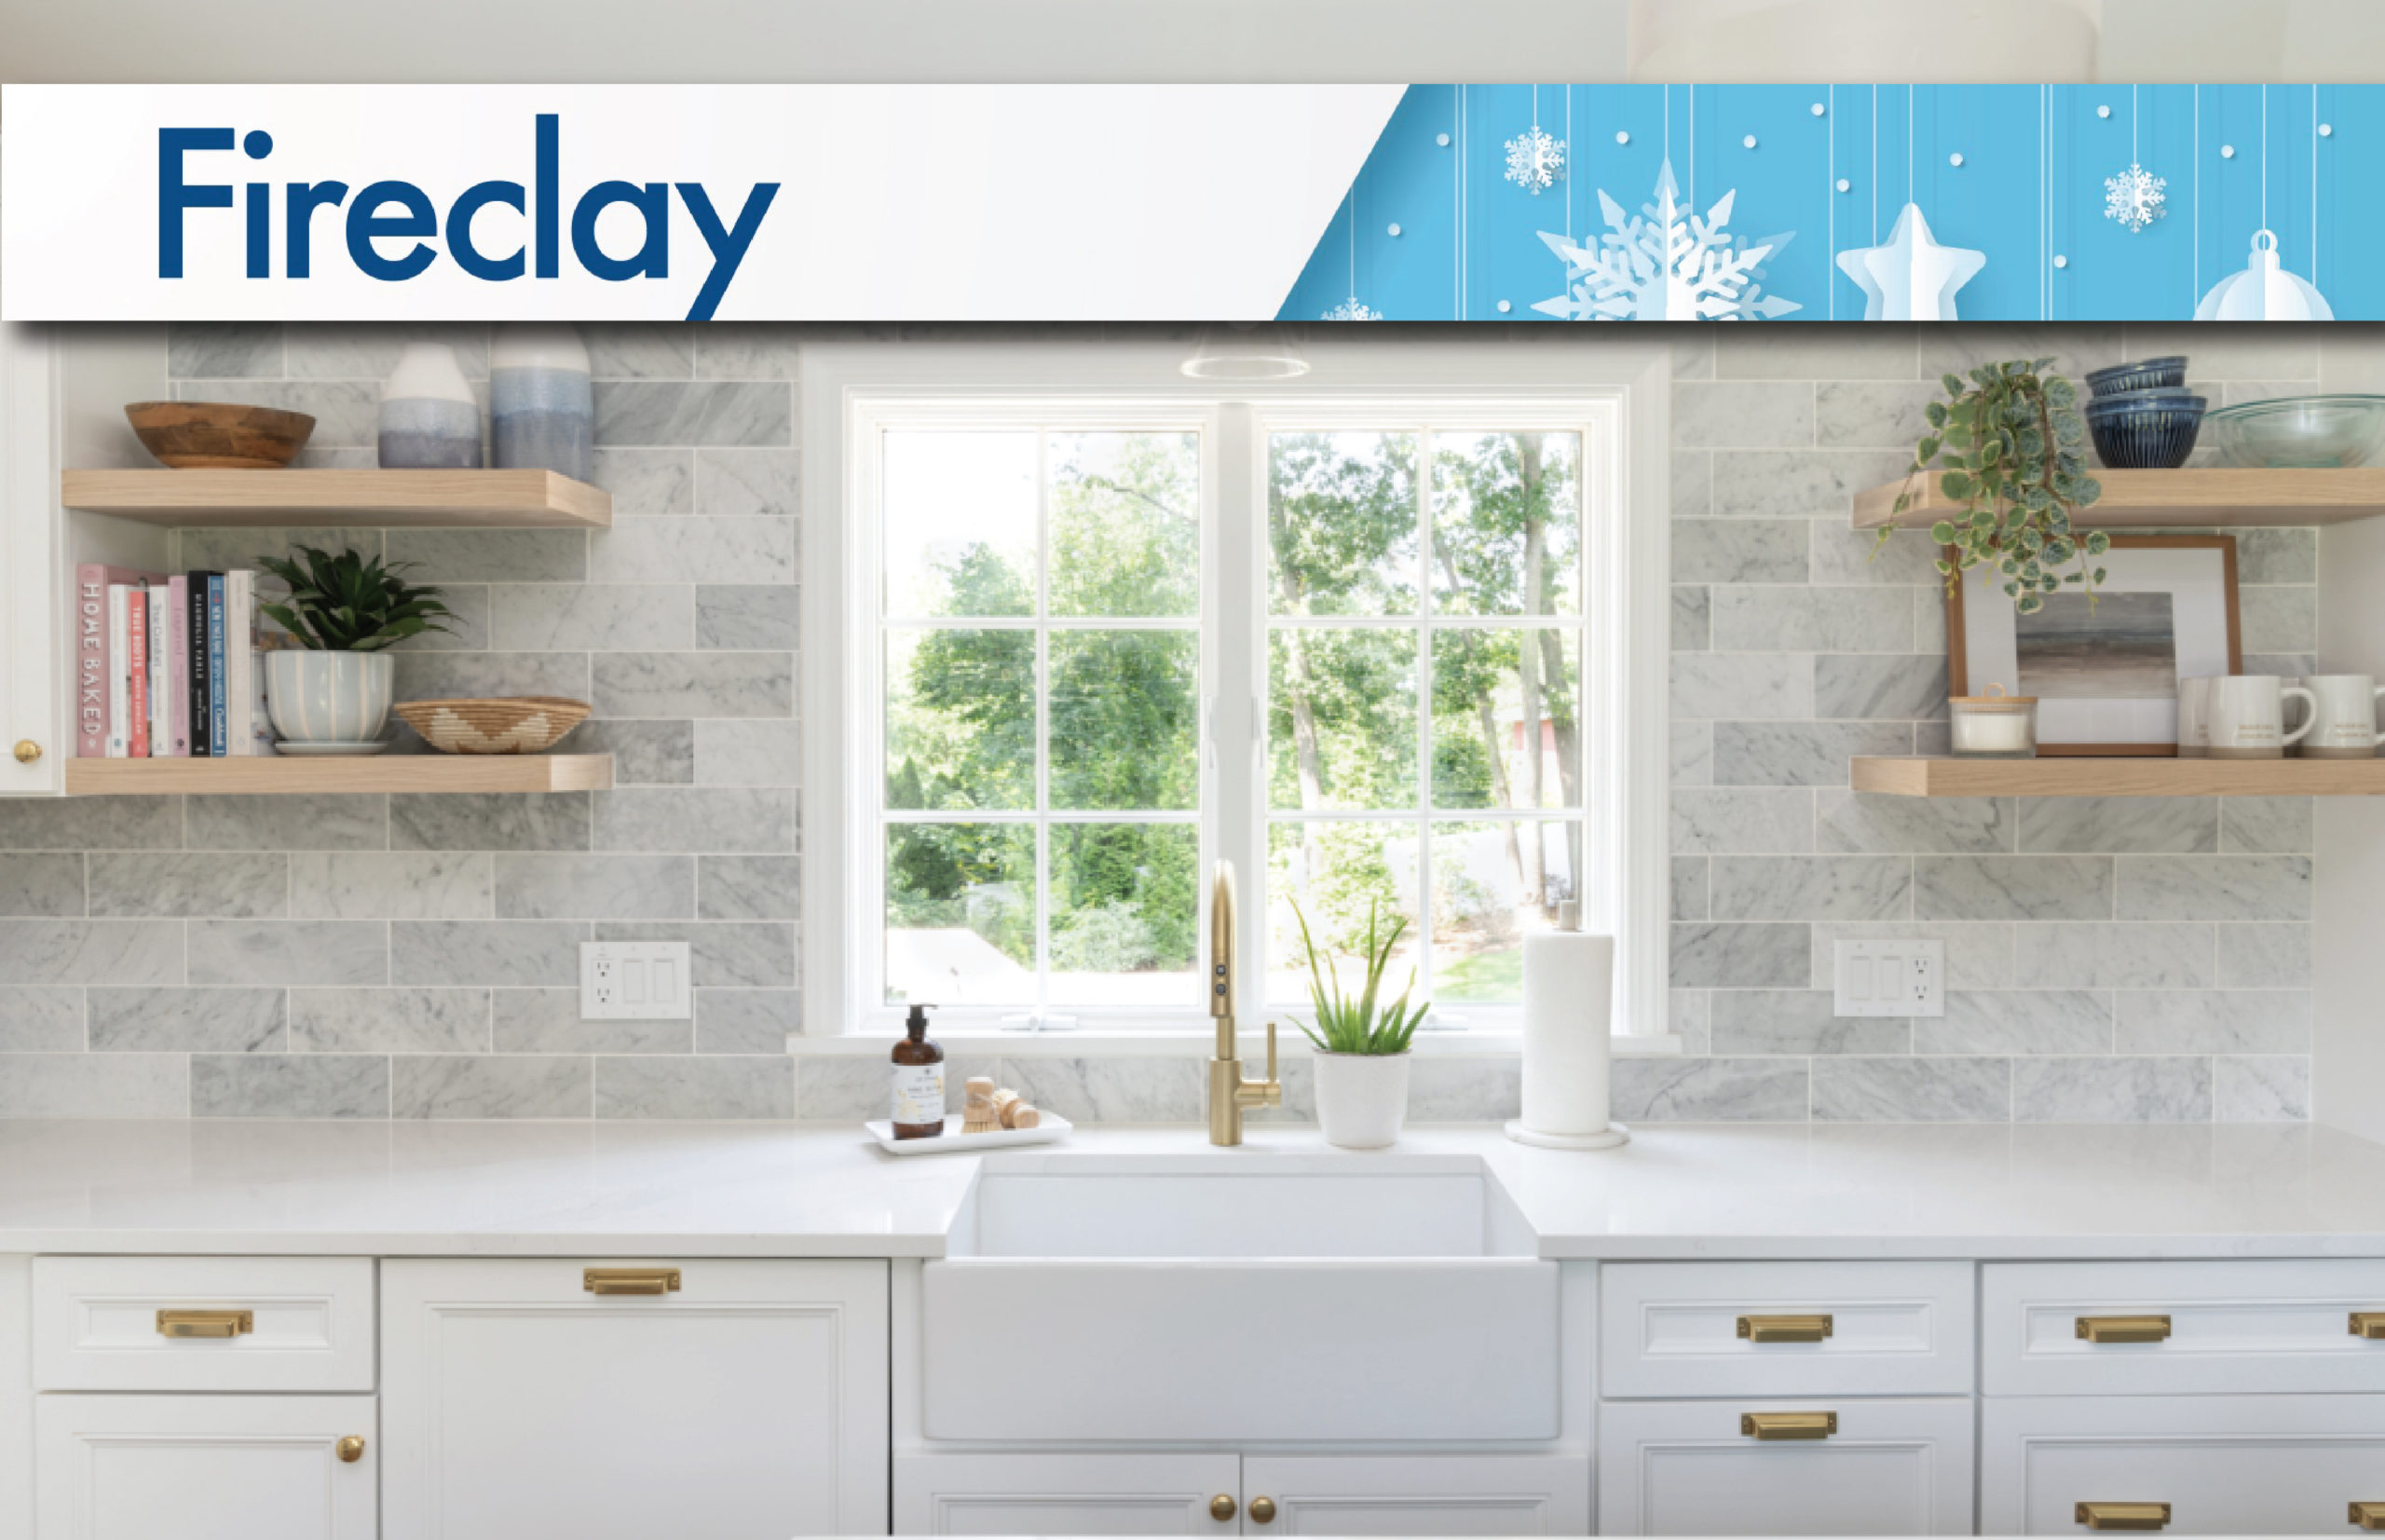 Fireclay Holiday Sale Banner